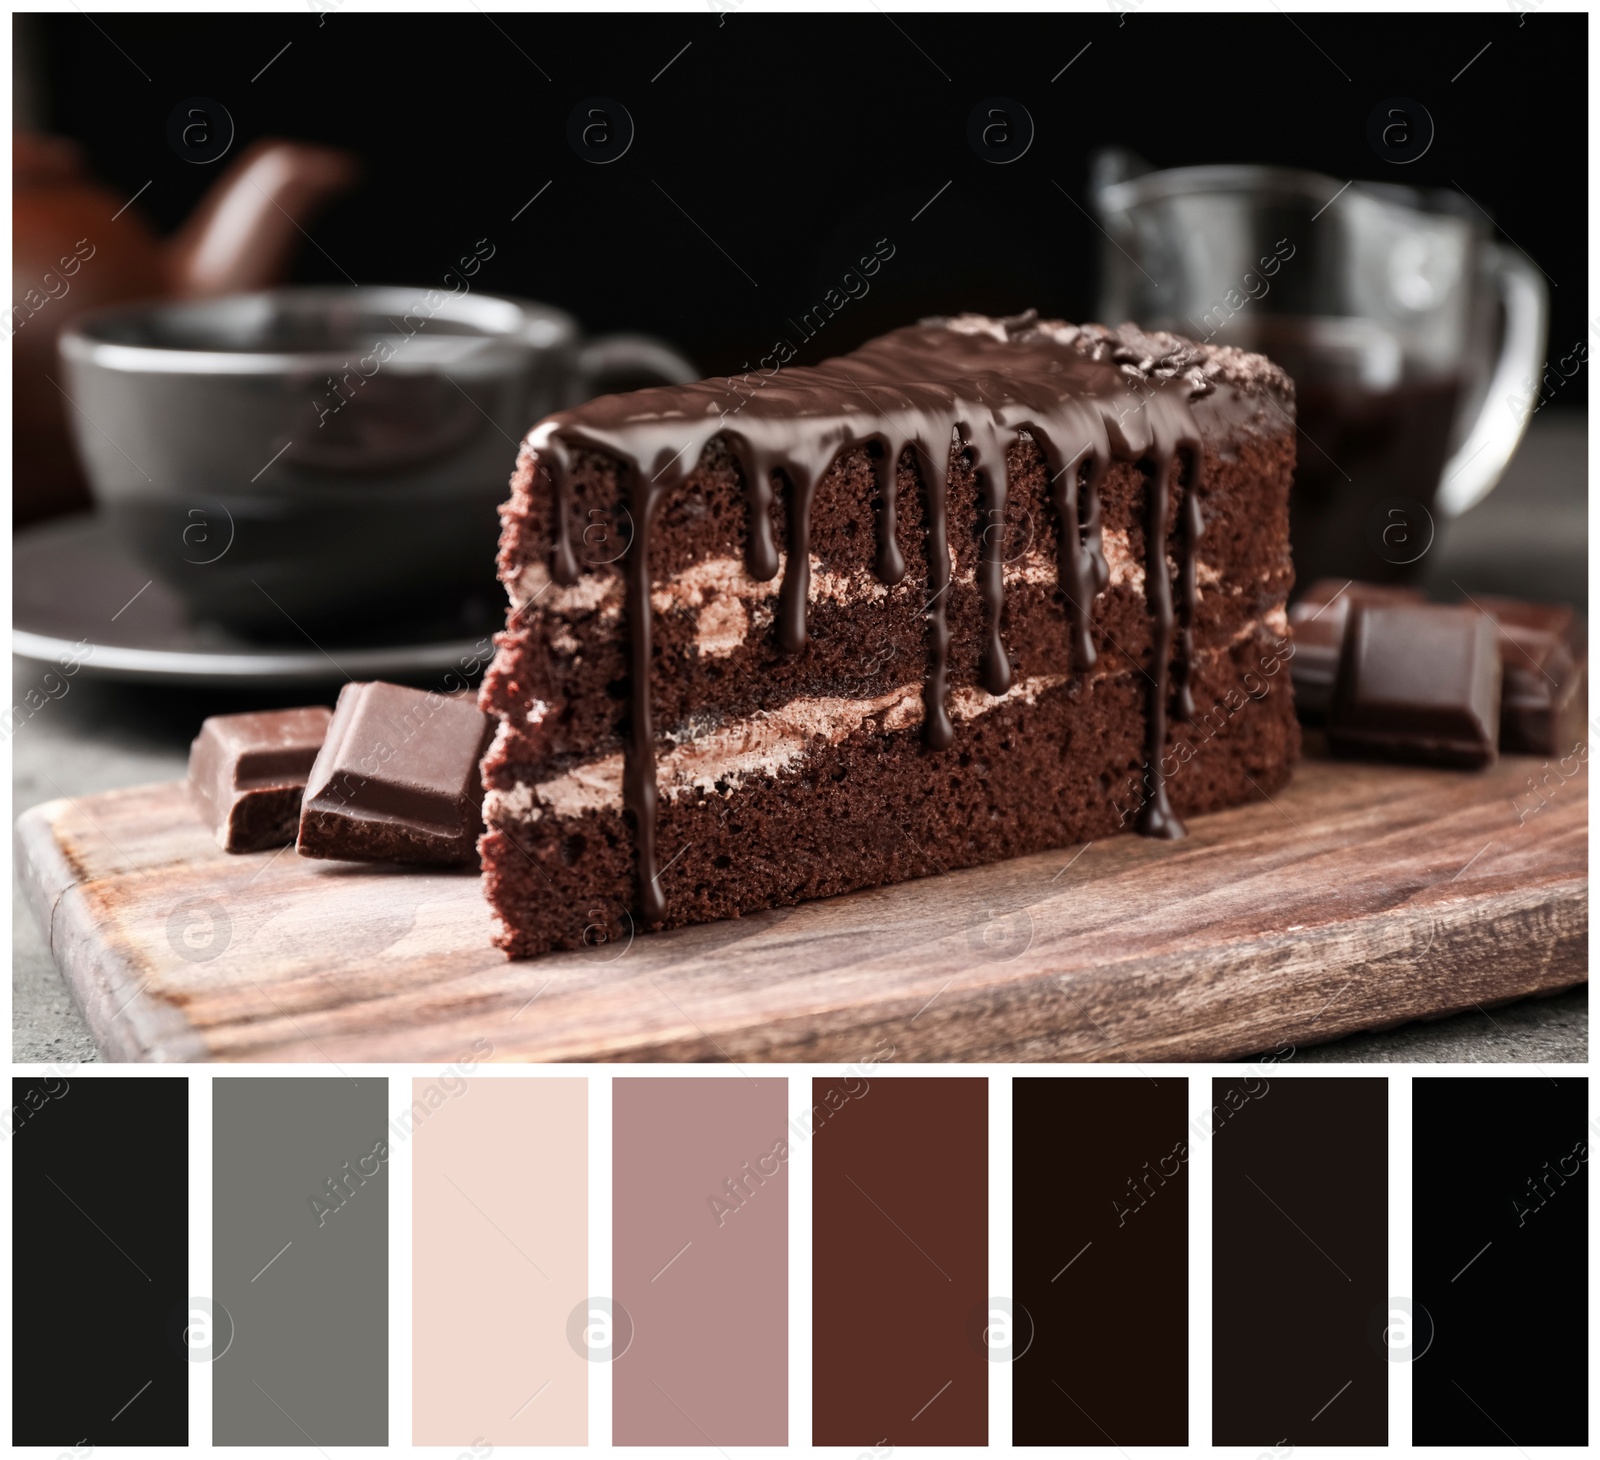 Image of Delicious chocolate cake on wooden board and color palette. Collage